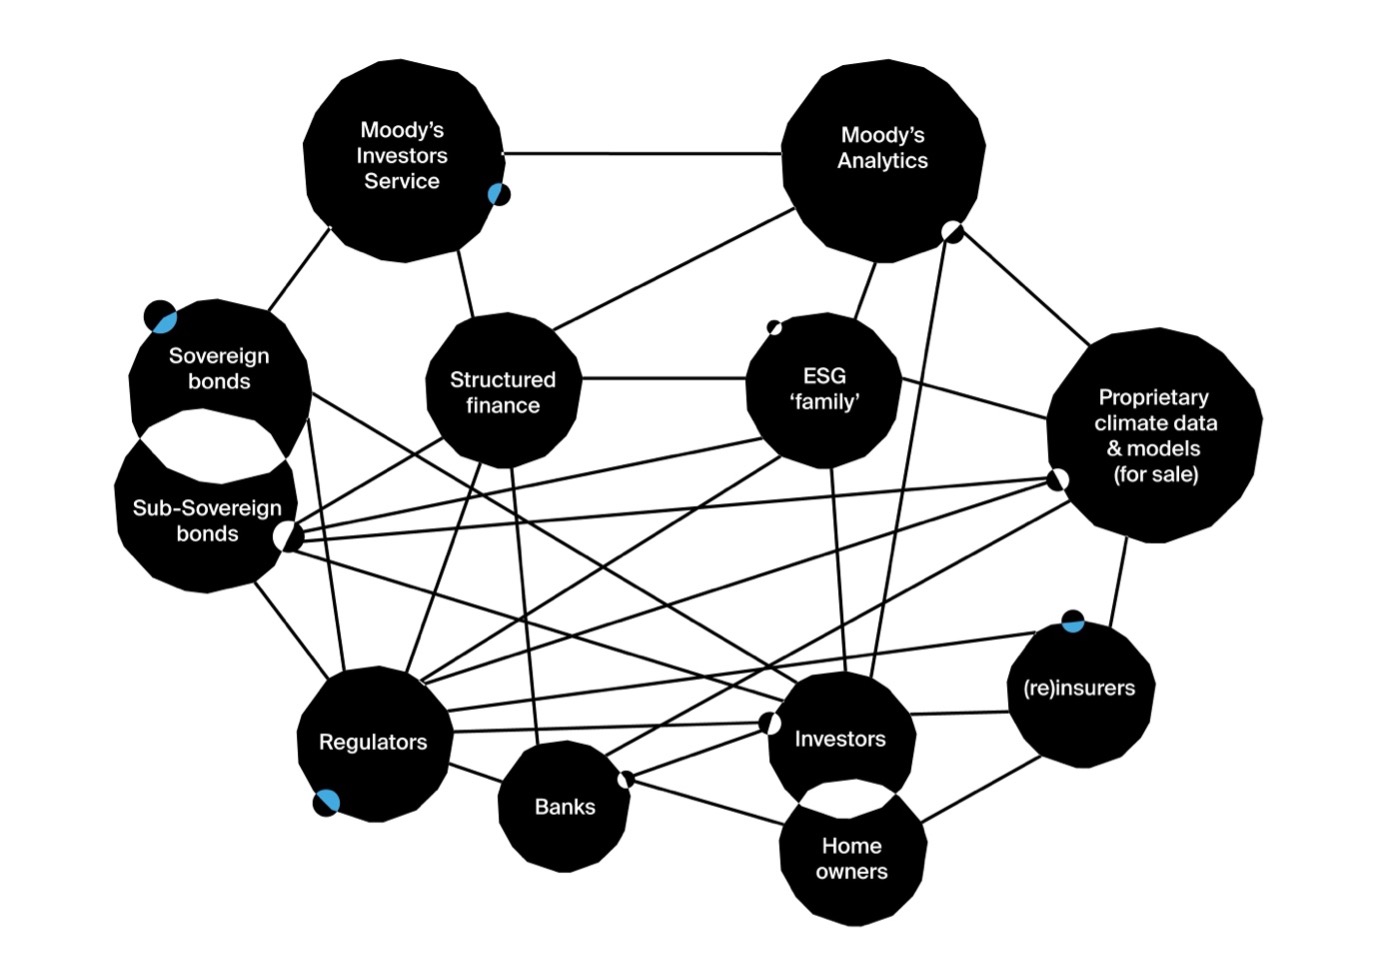 The Networked Business of Climate Risk. Source: Authors, with support from Ineke Lammers